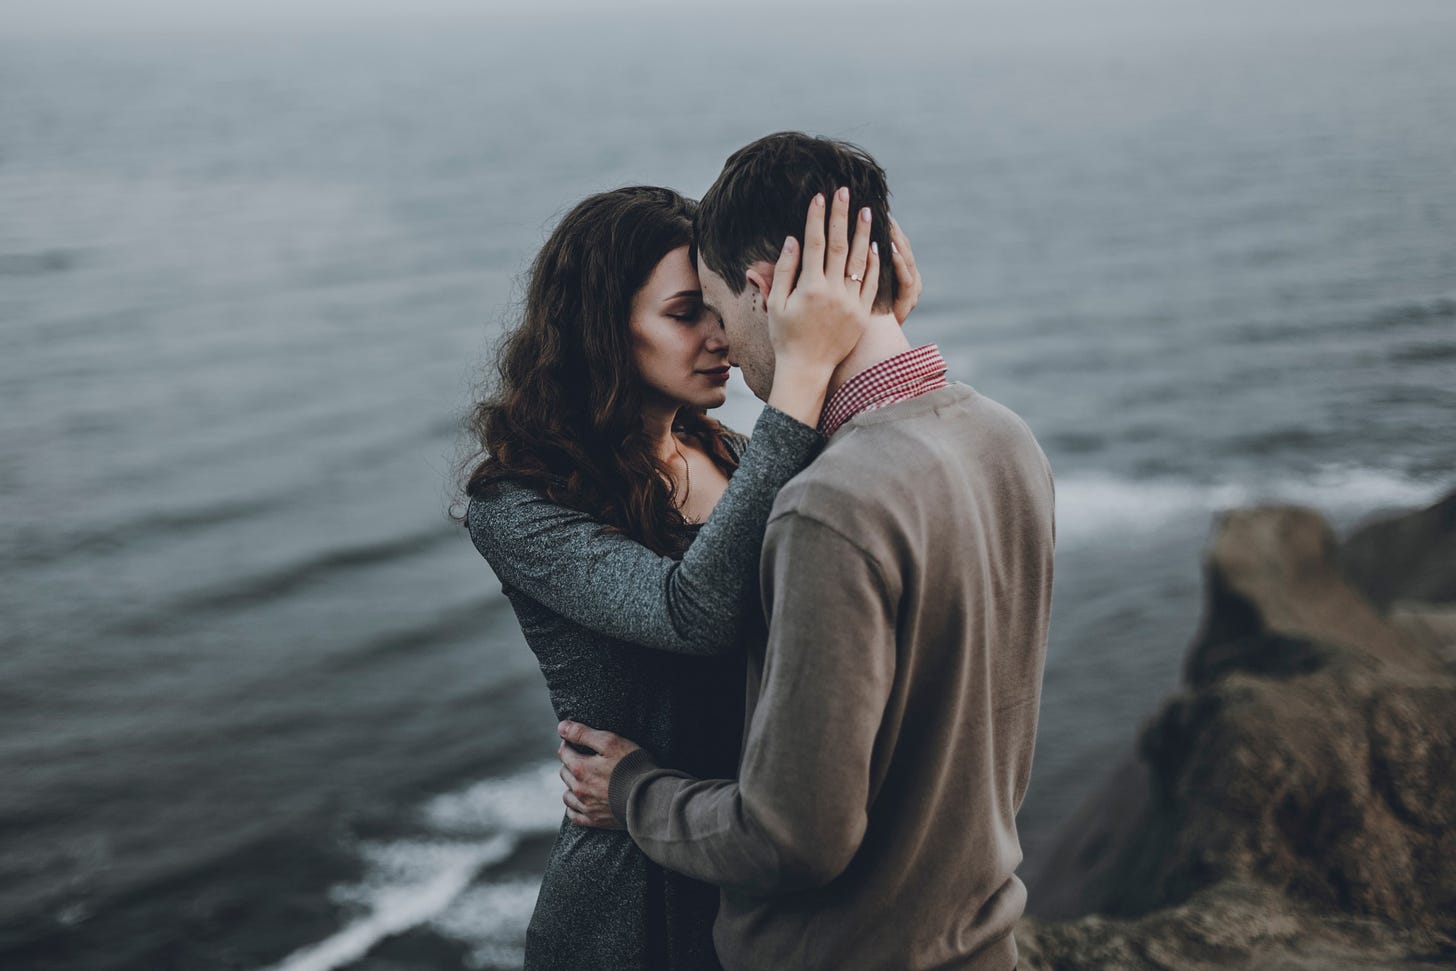 A couple embraces on the edge of a cliff on a cloudy day. The ocean moves behind them.